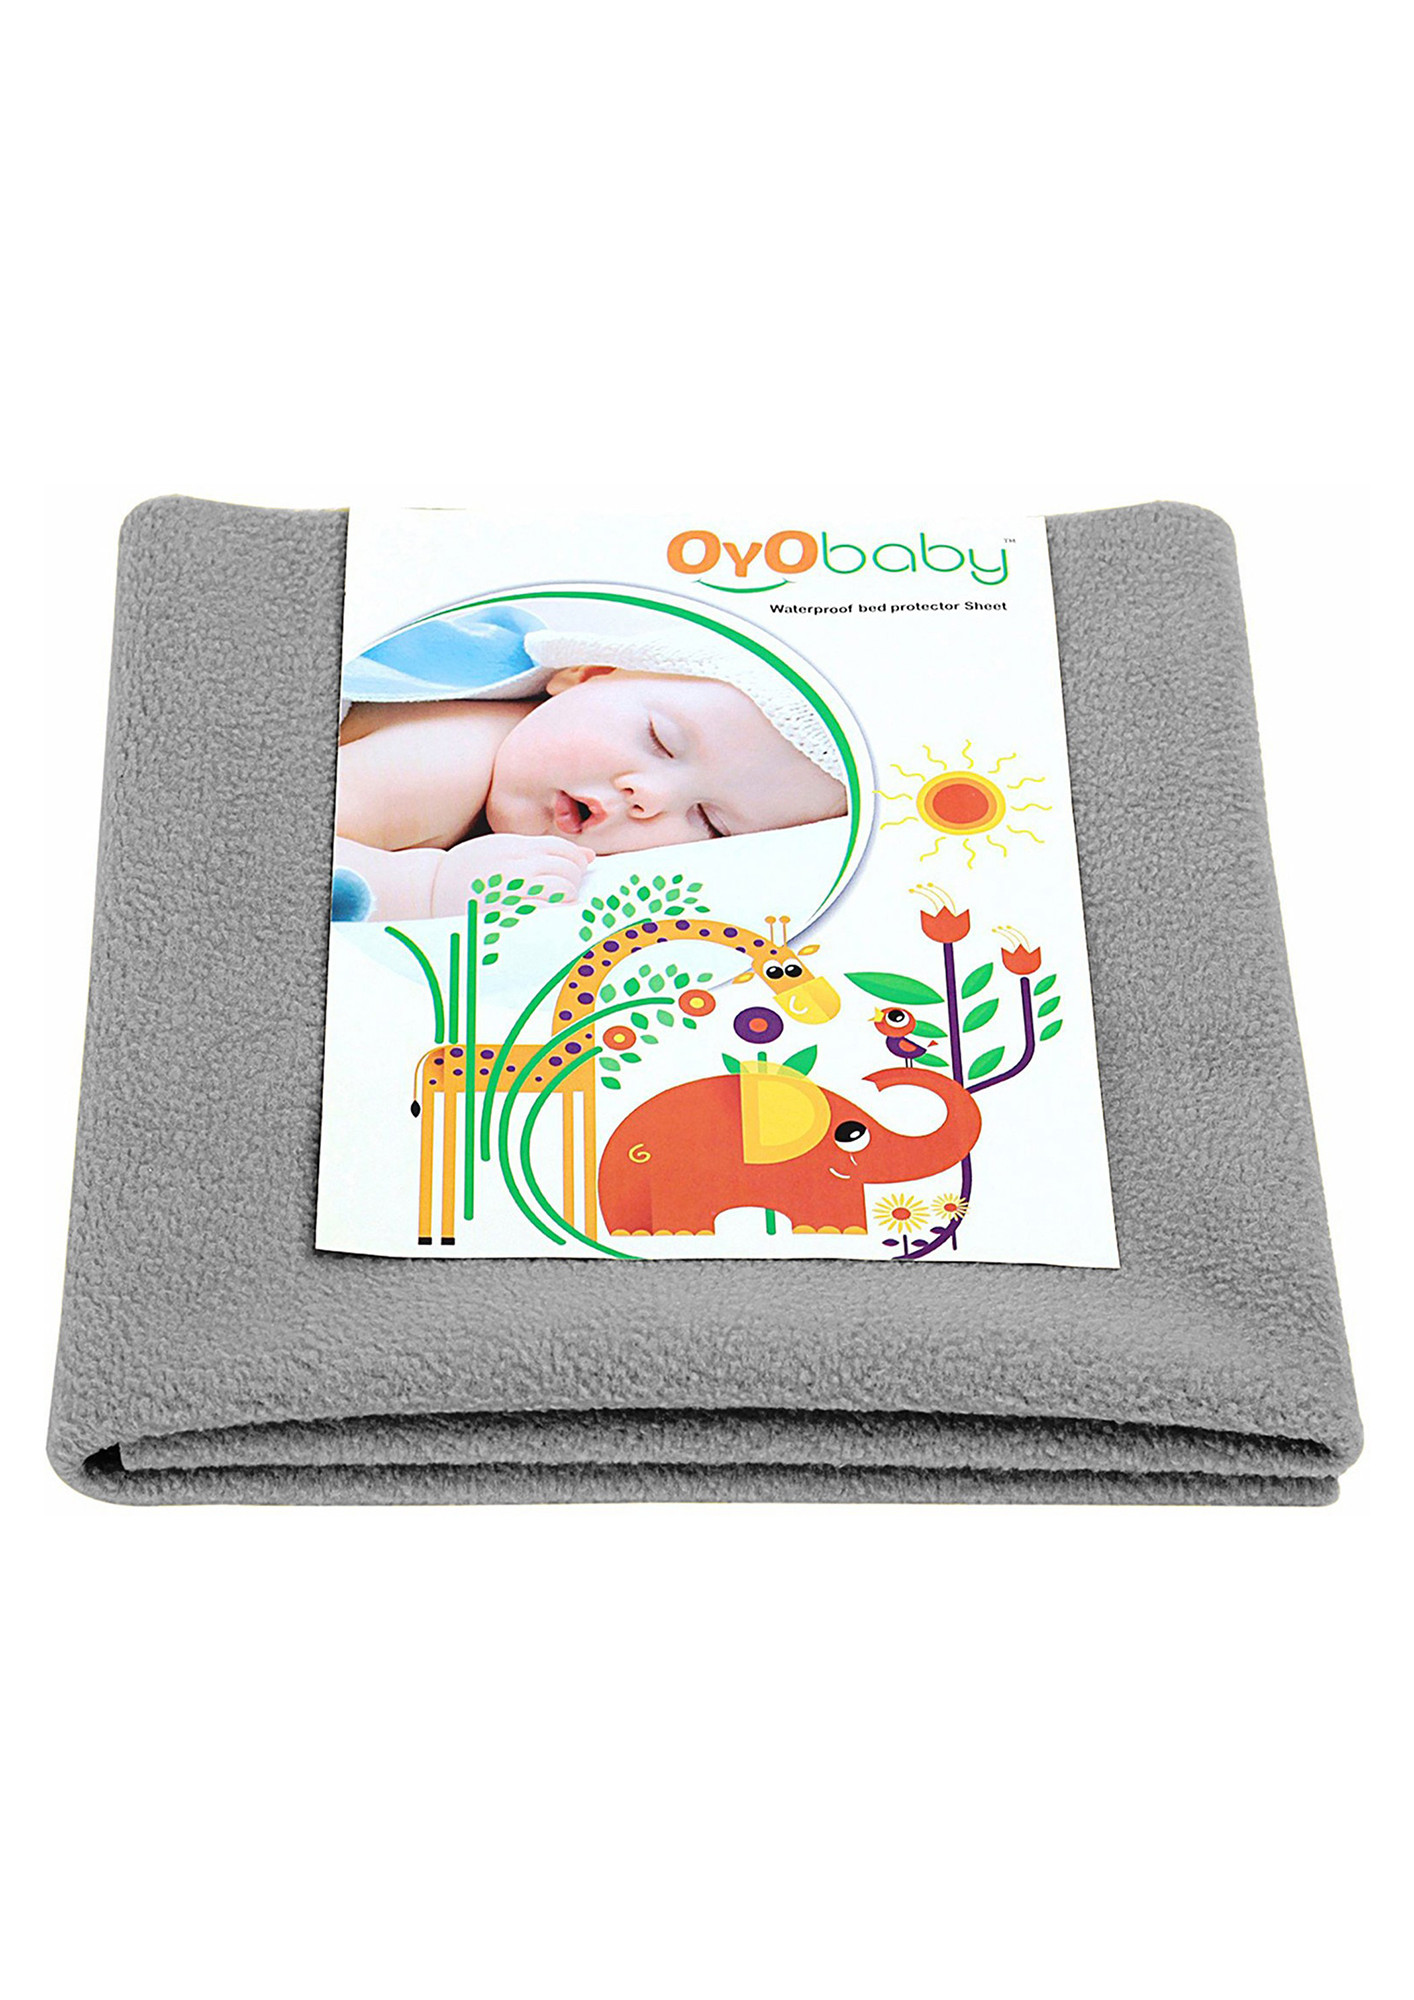 Oyo Baby Cotton Baby Bed Protecting Mat (Grey, Small)-OB-2020-GR